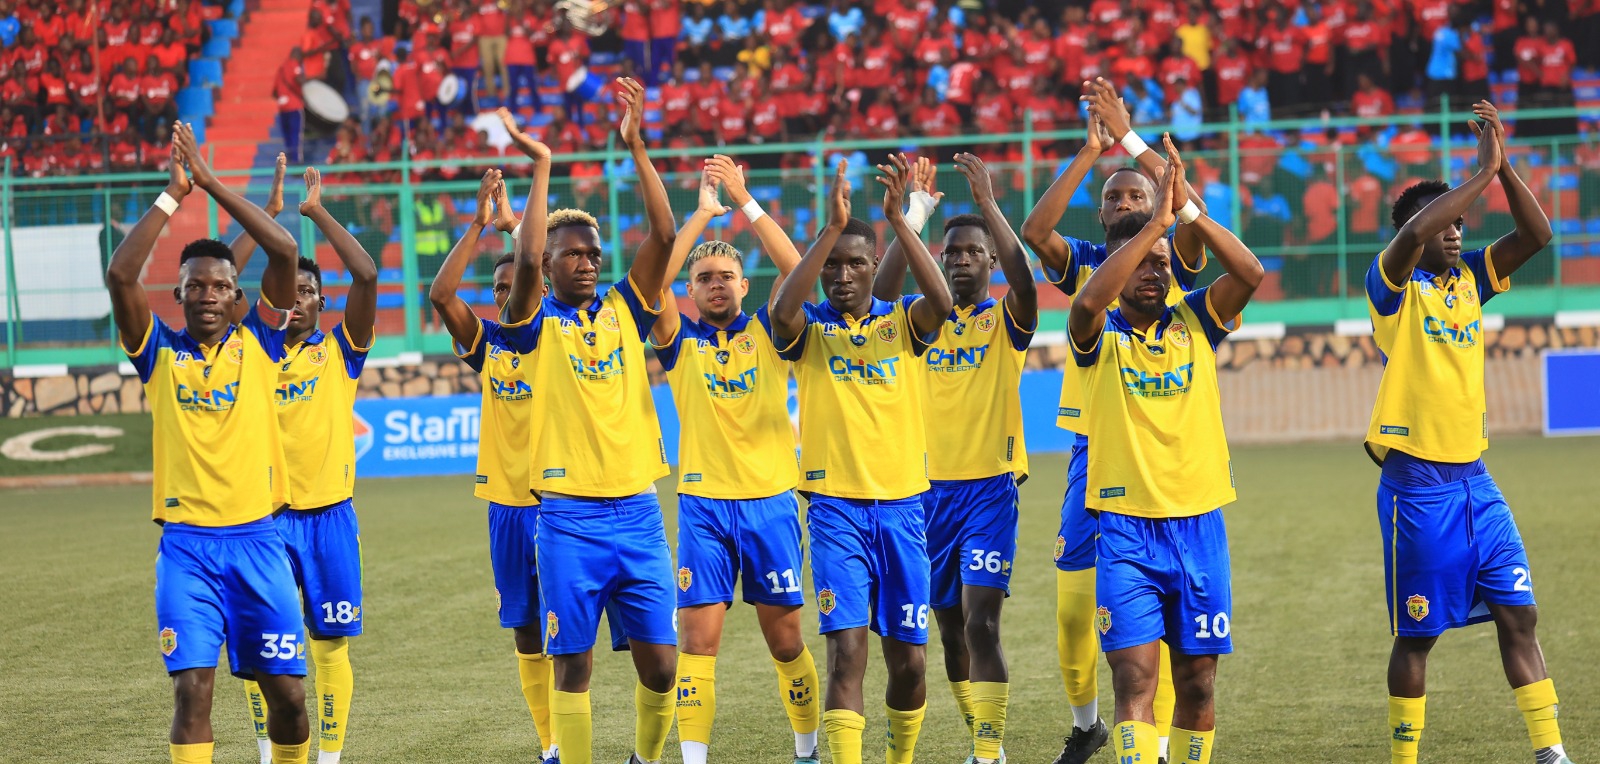 KCCA Vs Busoga United: Team News, Probable Lineups, Preview and Stats